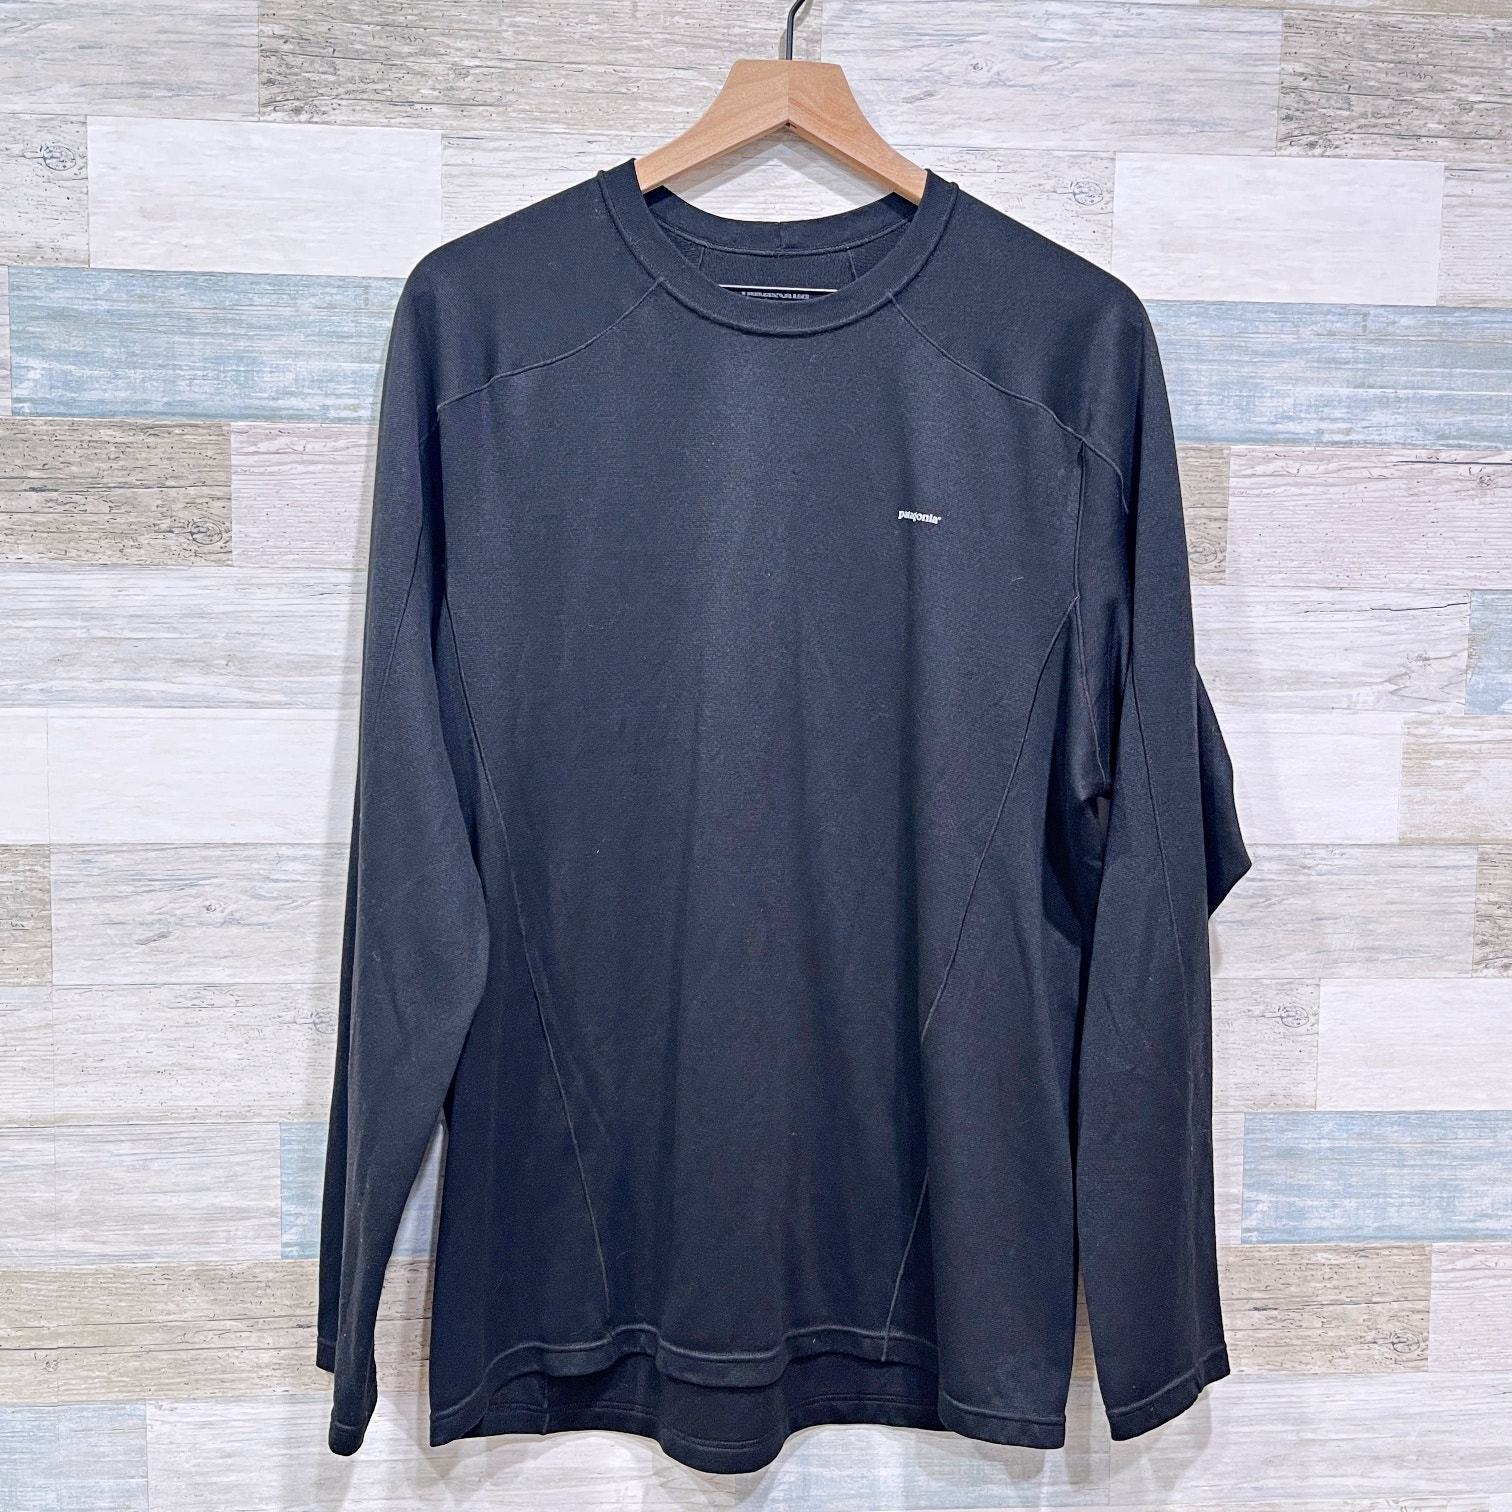 Primary image for Patagonia Capilene 3 Midweight Crewneck Baselayer Top Black Slim Fit Mens Large